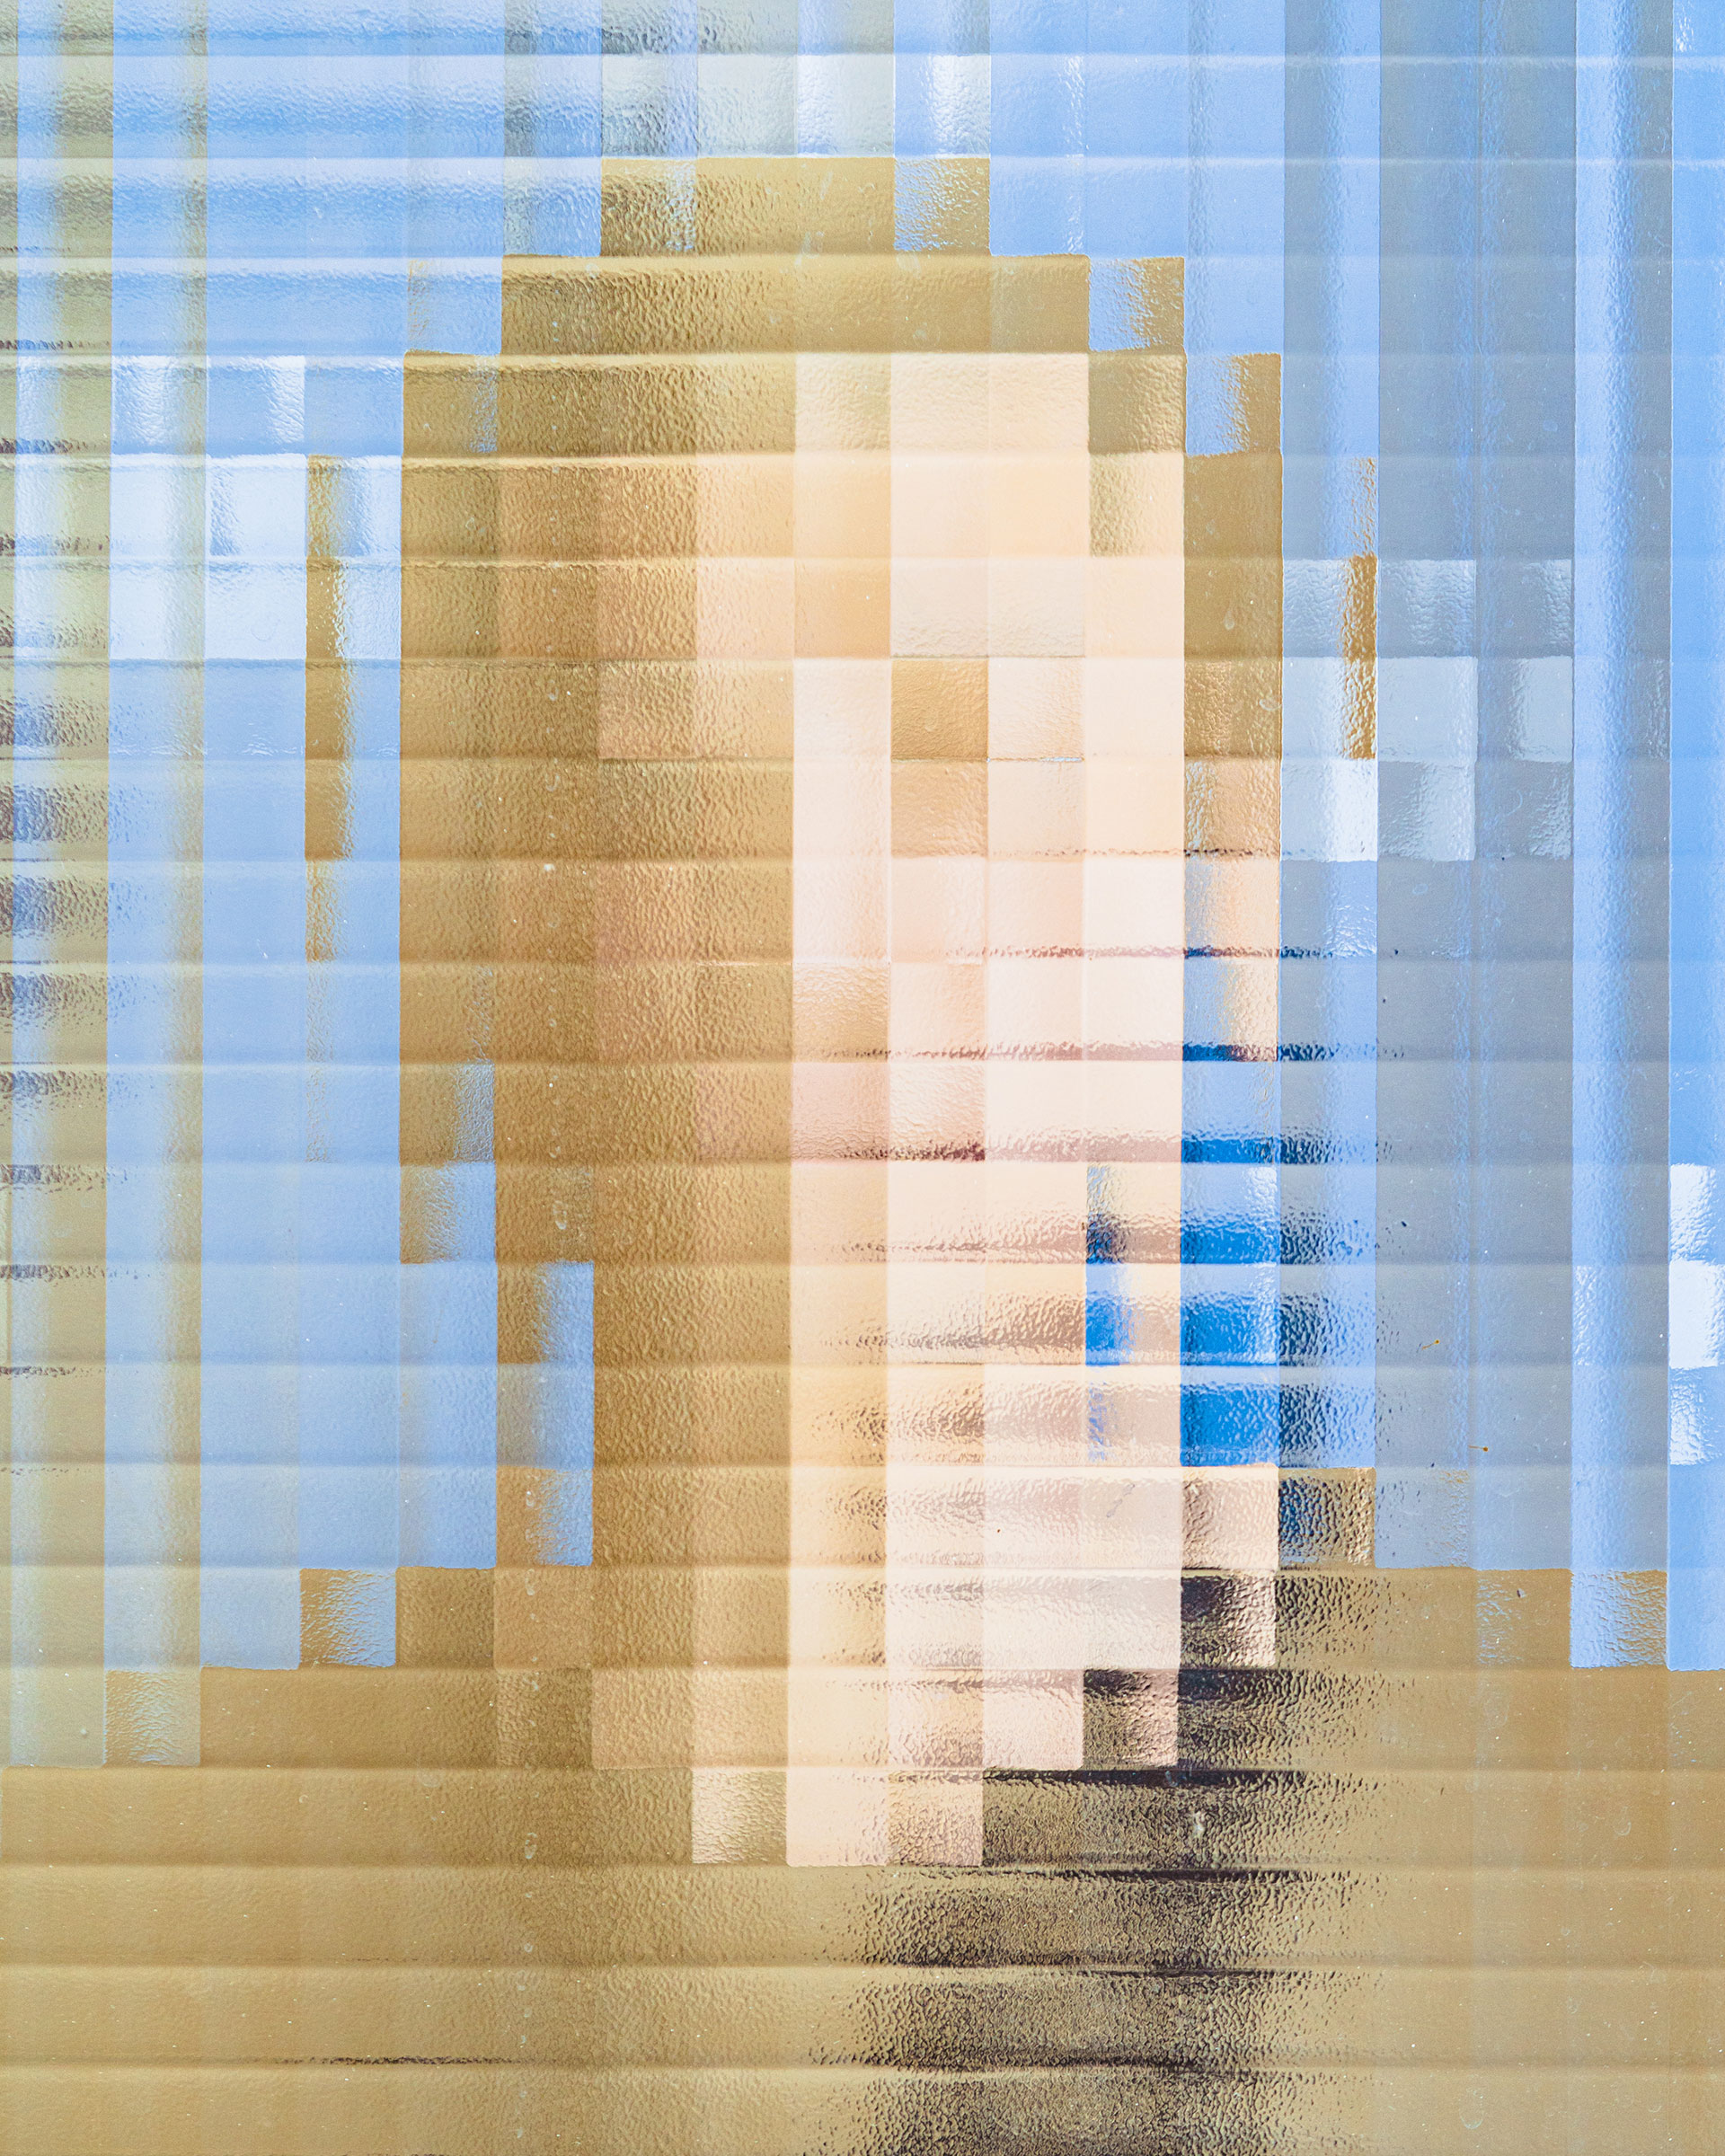 face behind pixelated glass